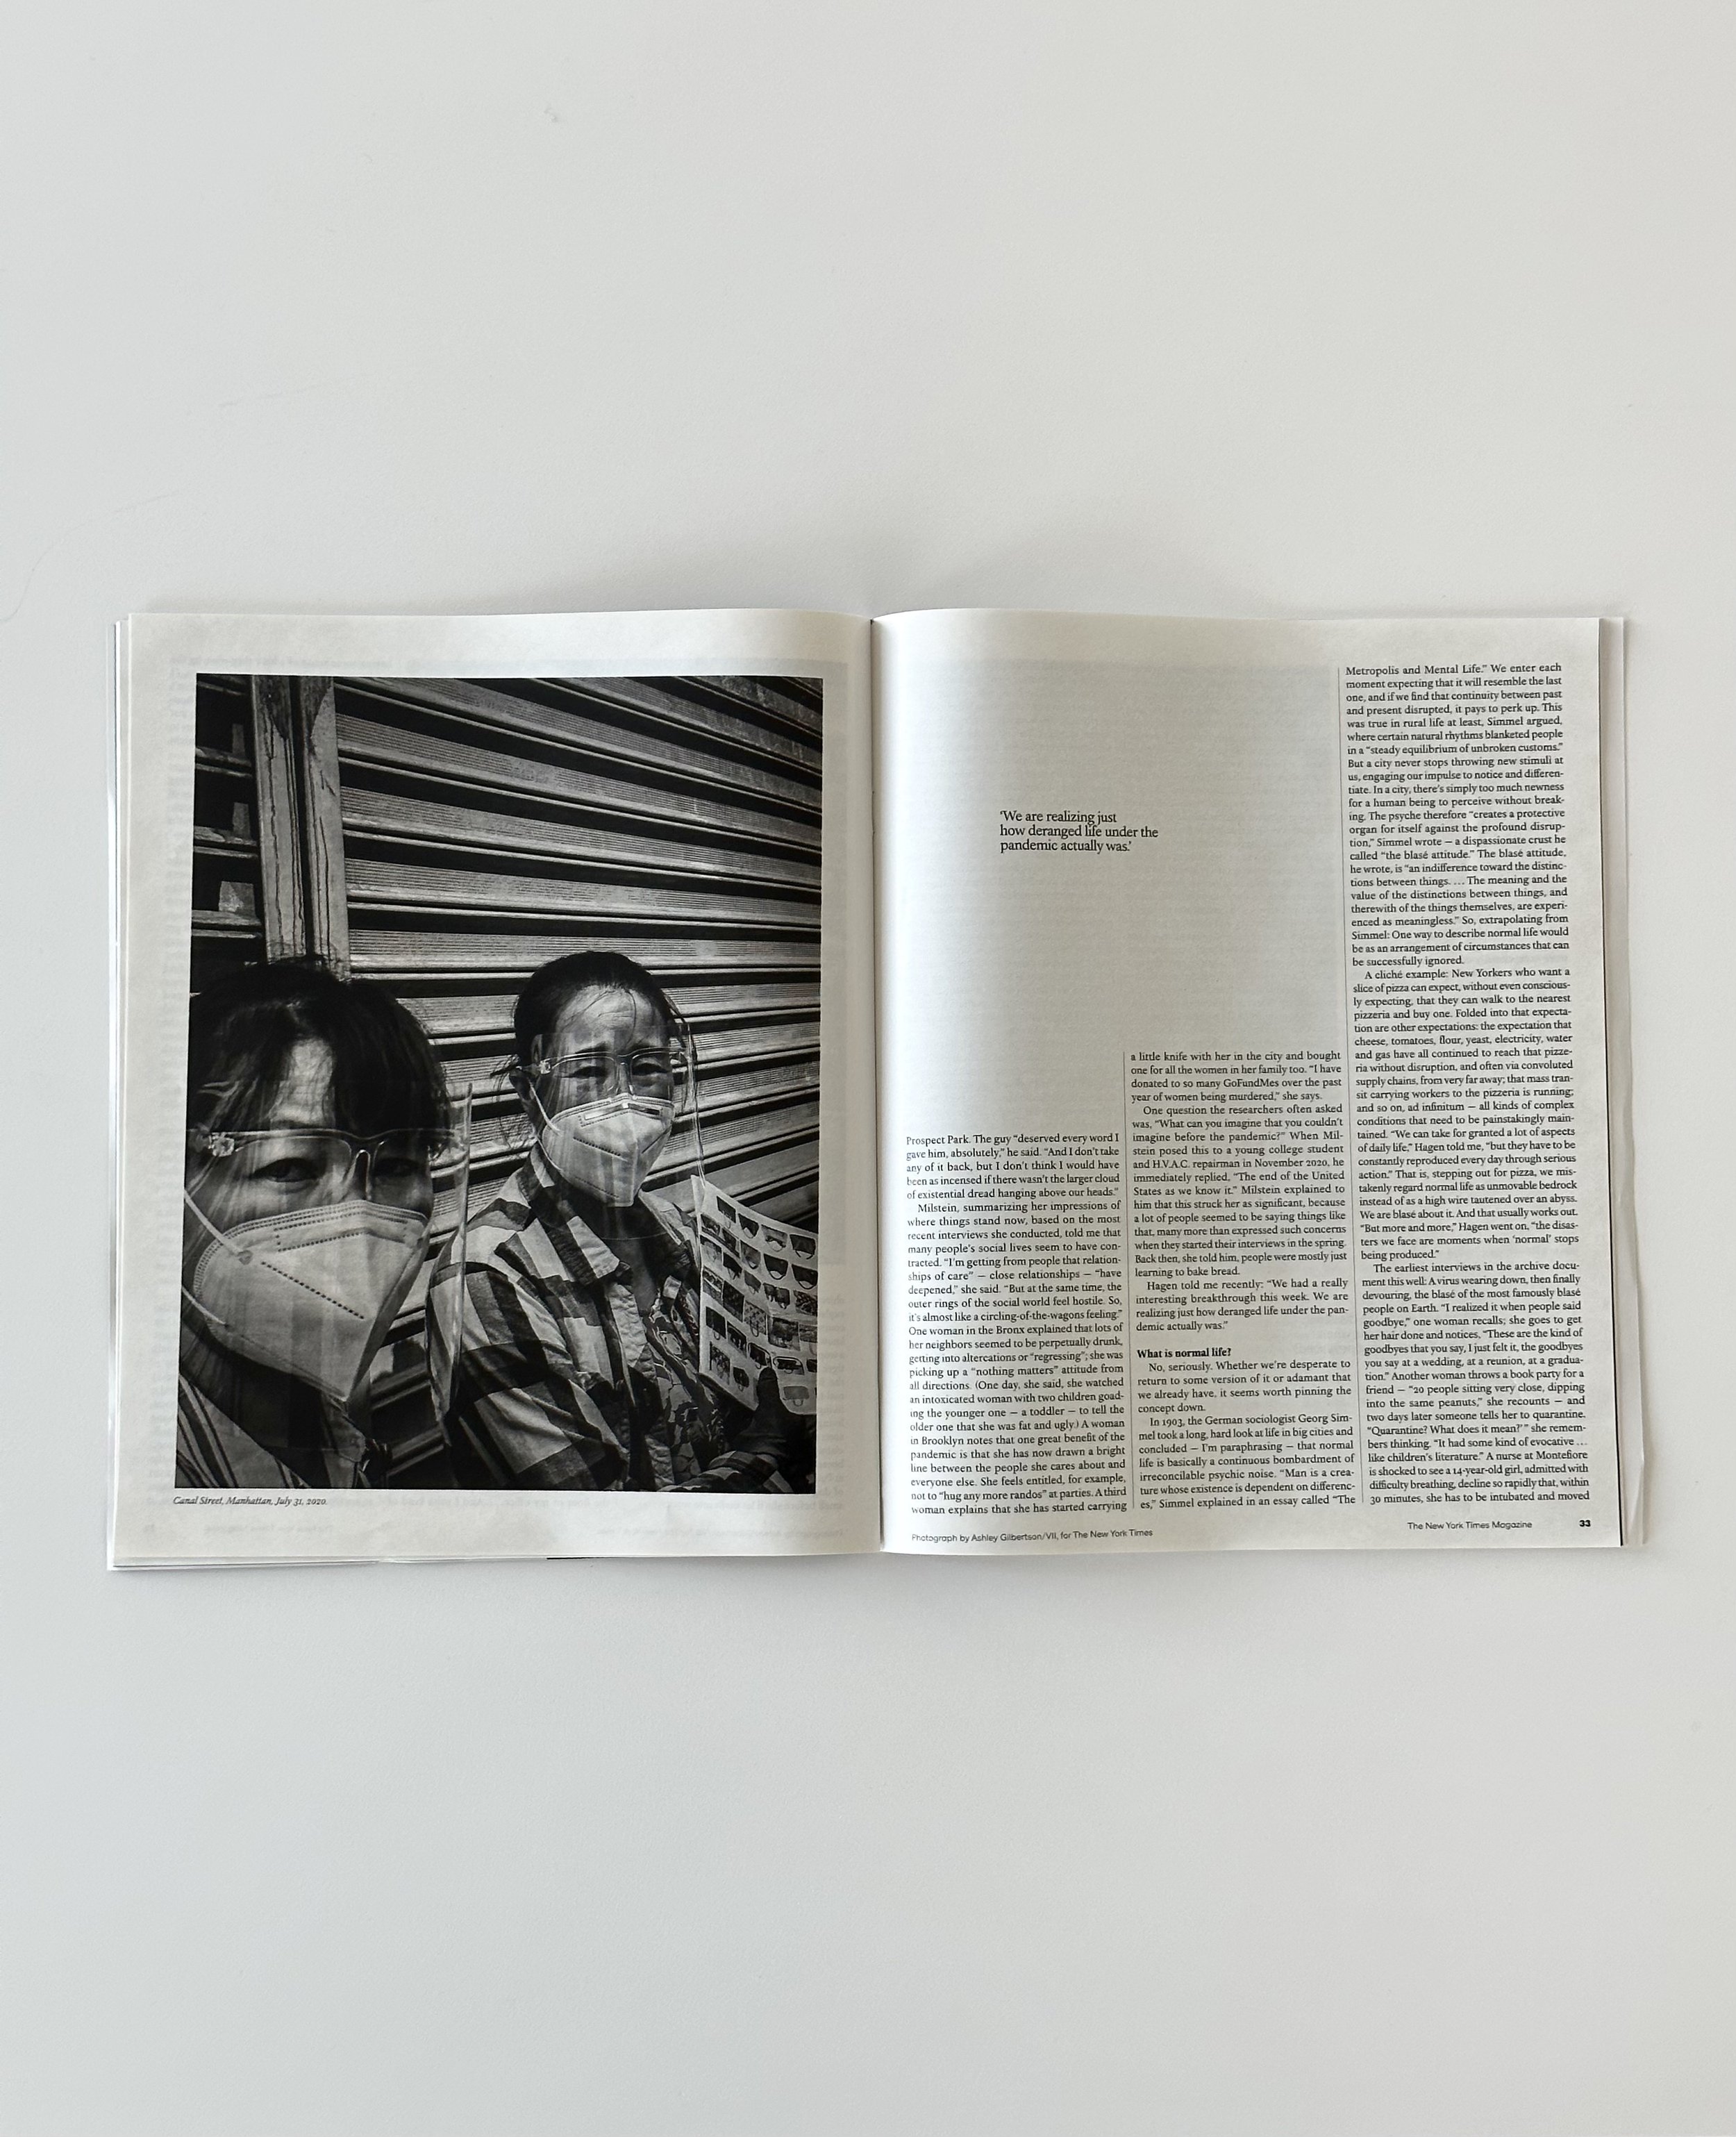  New York Times Magazine opened. Black and white image of people in masks on left side, text on the right. 